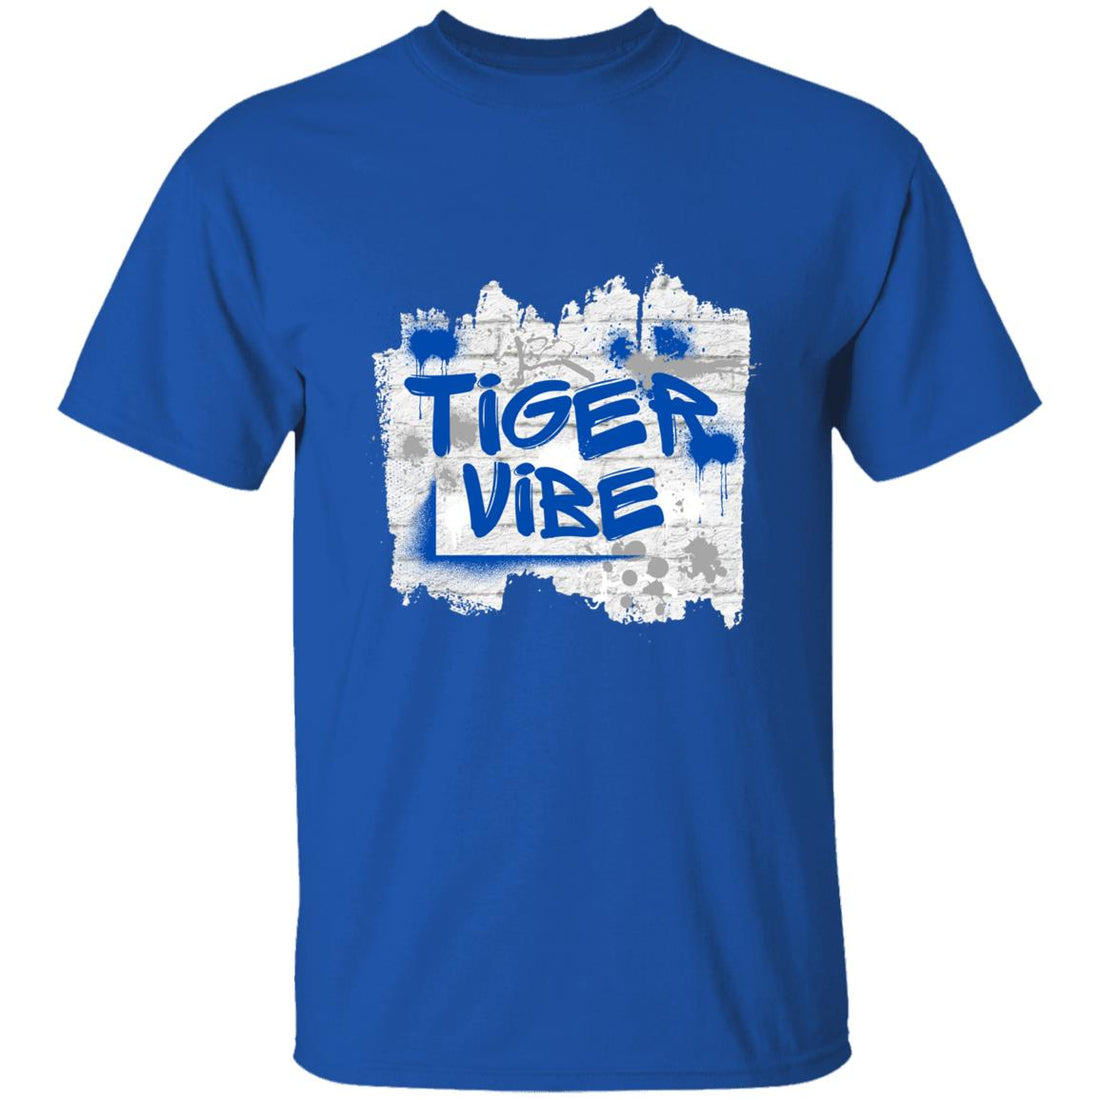 Tiger Vibe Youth T-Shirt - T-Shirts - Positively Sassy - Tiger Vibe Youth T-Shirt